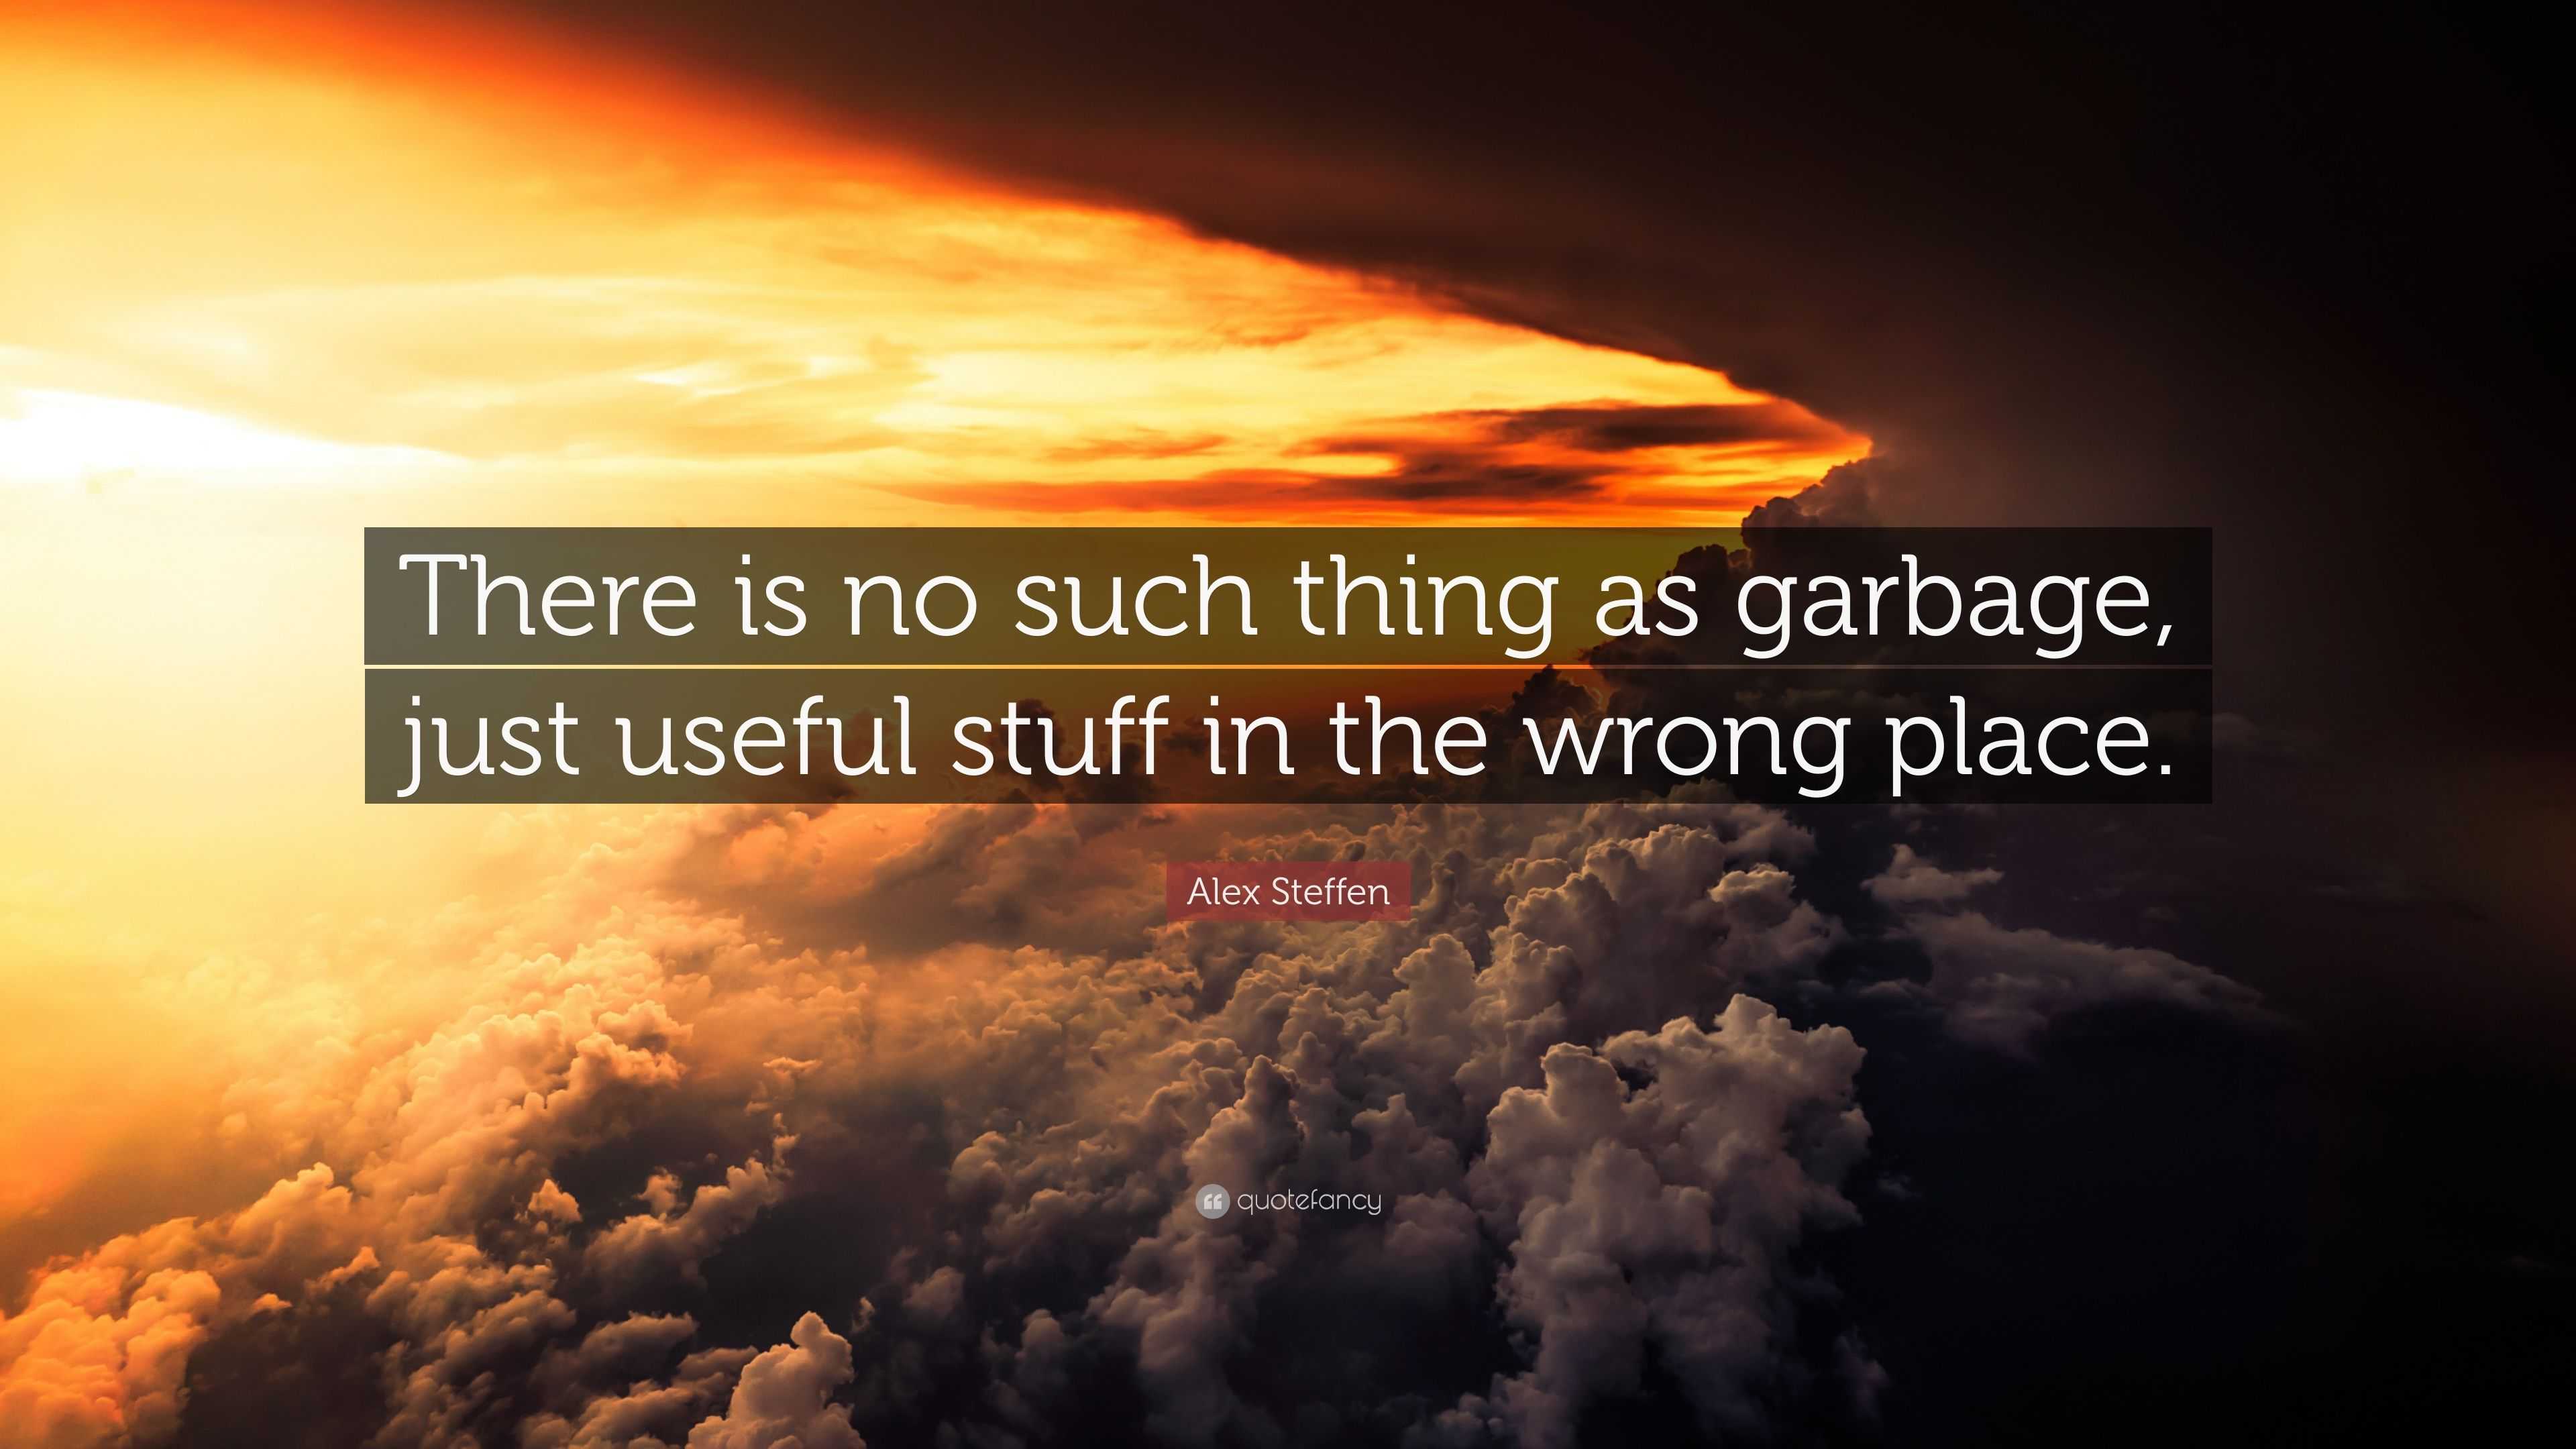 Alex Steffen Quote: “There is no such thing as garbage, just